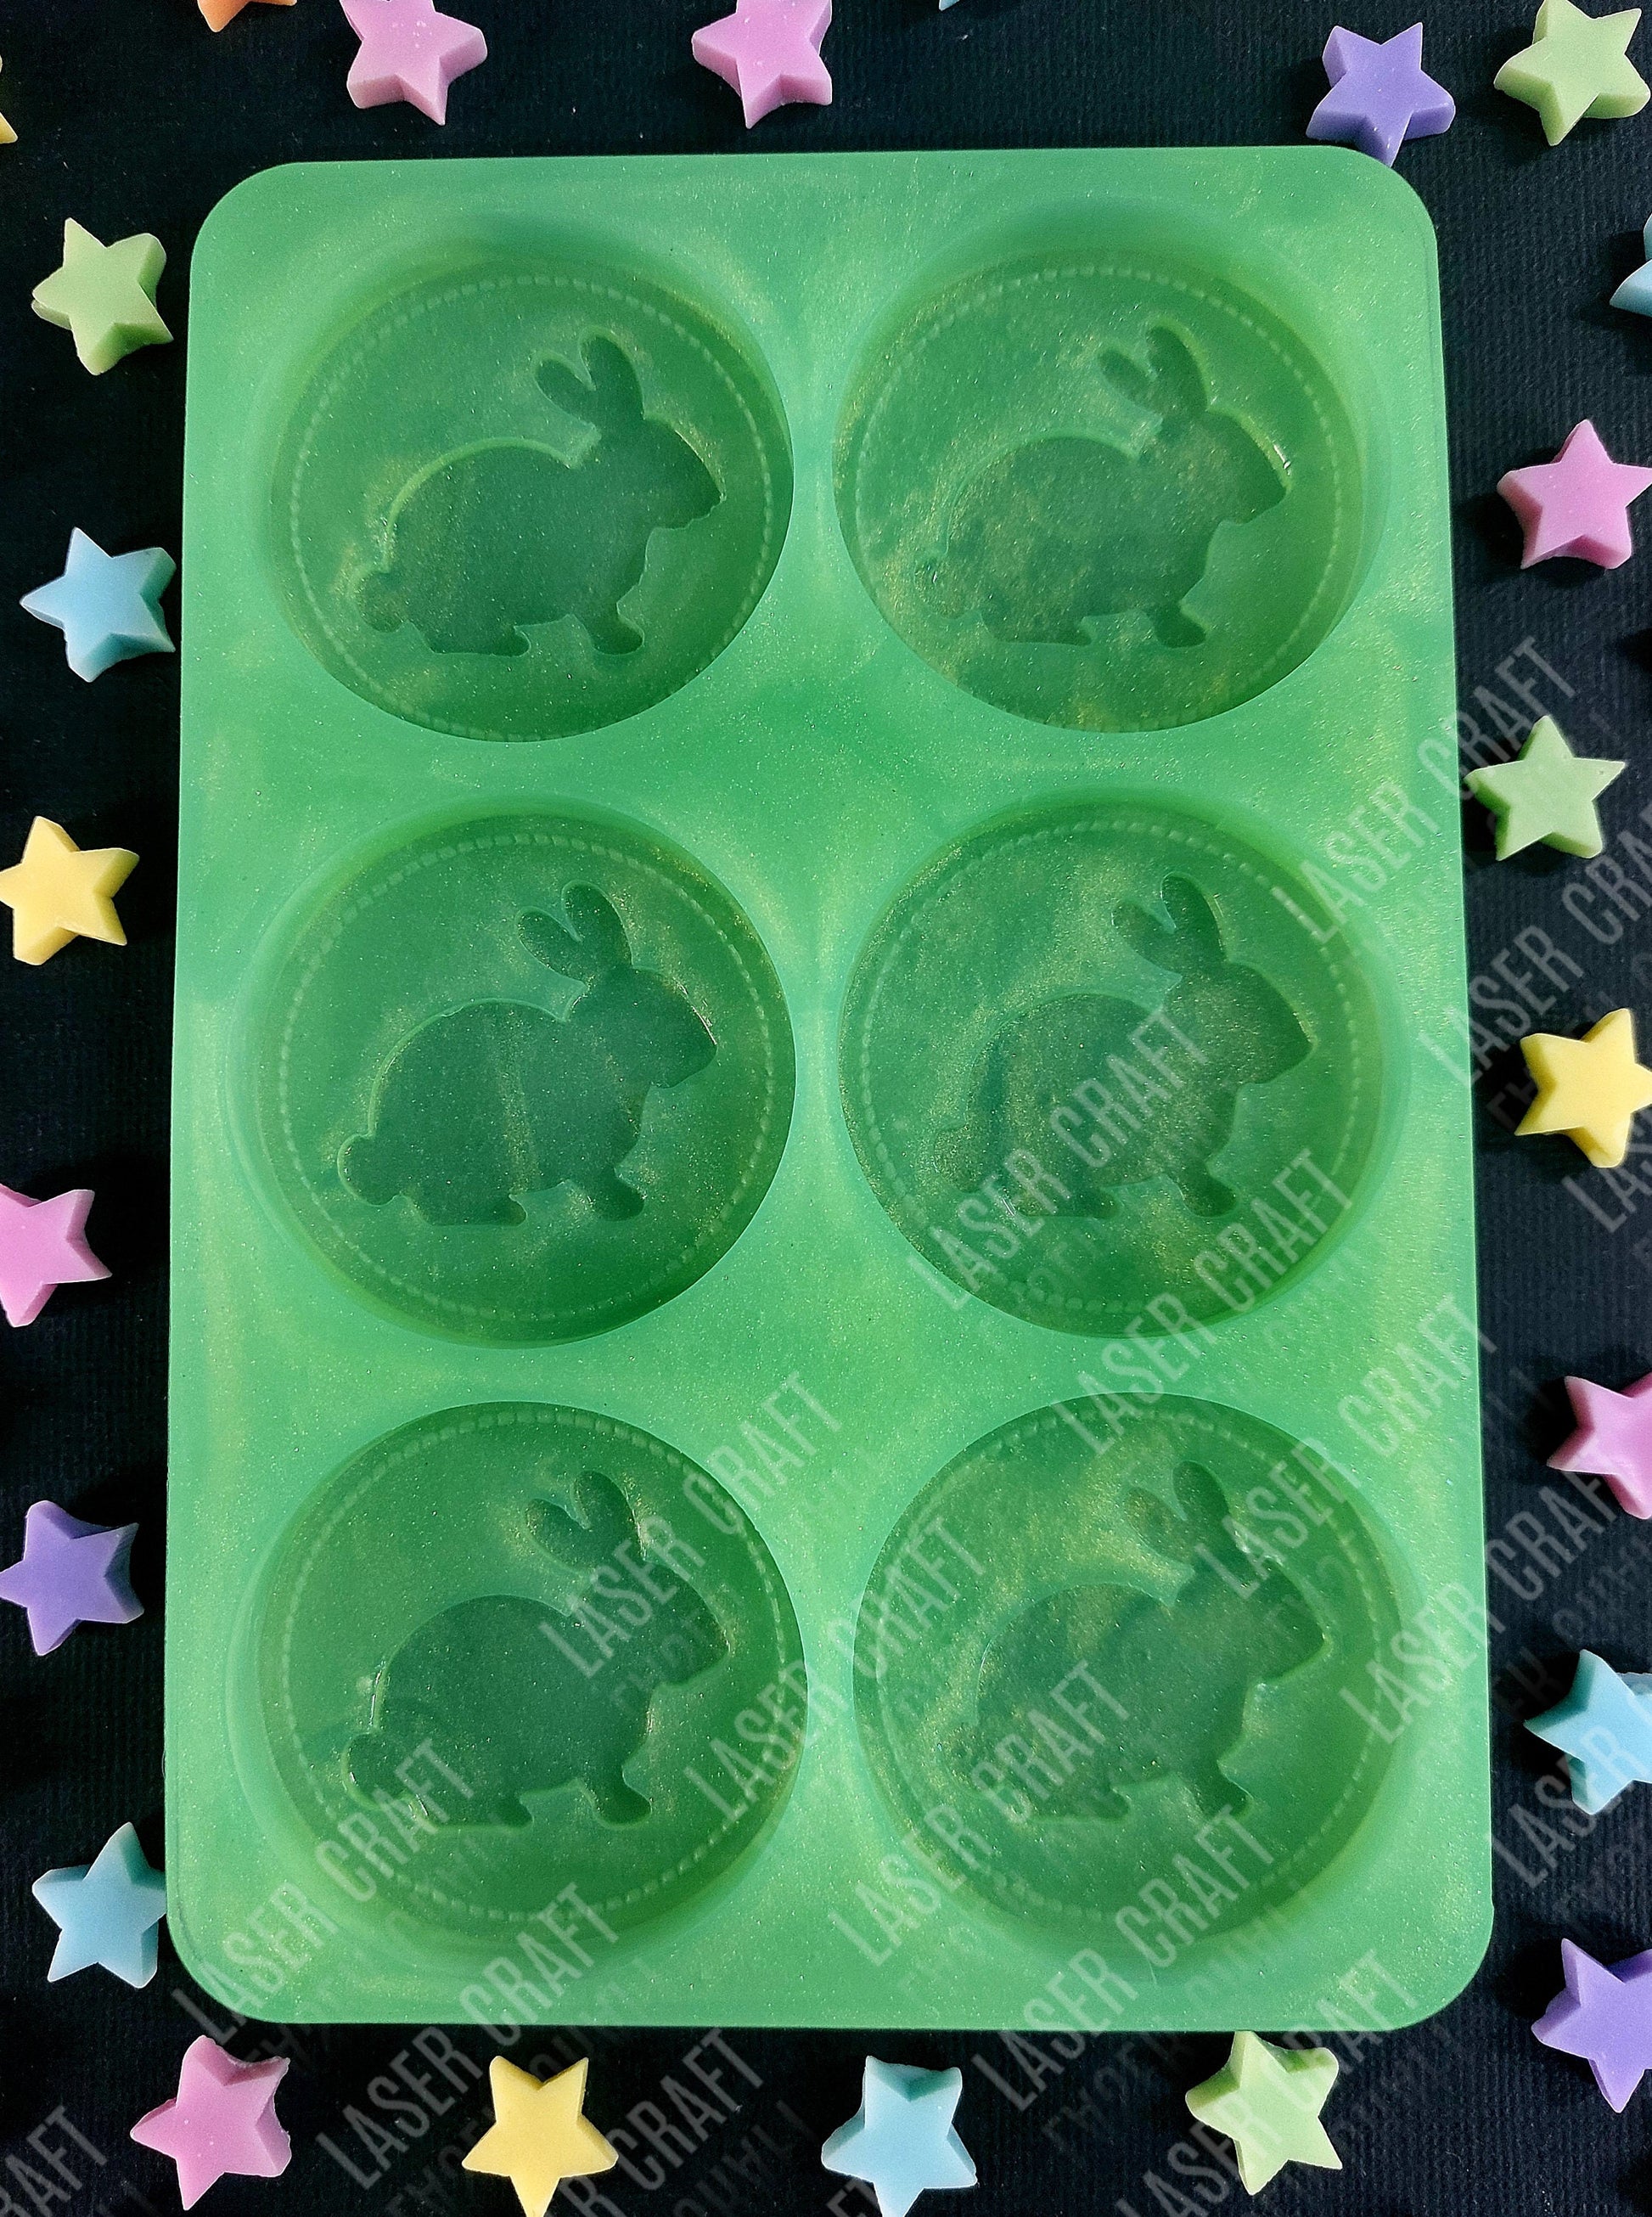 Bunny Disc 6 Cell Silicone Mould for wax, resin, soap etc